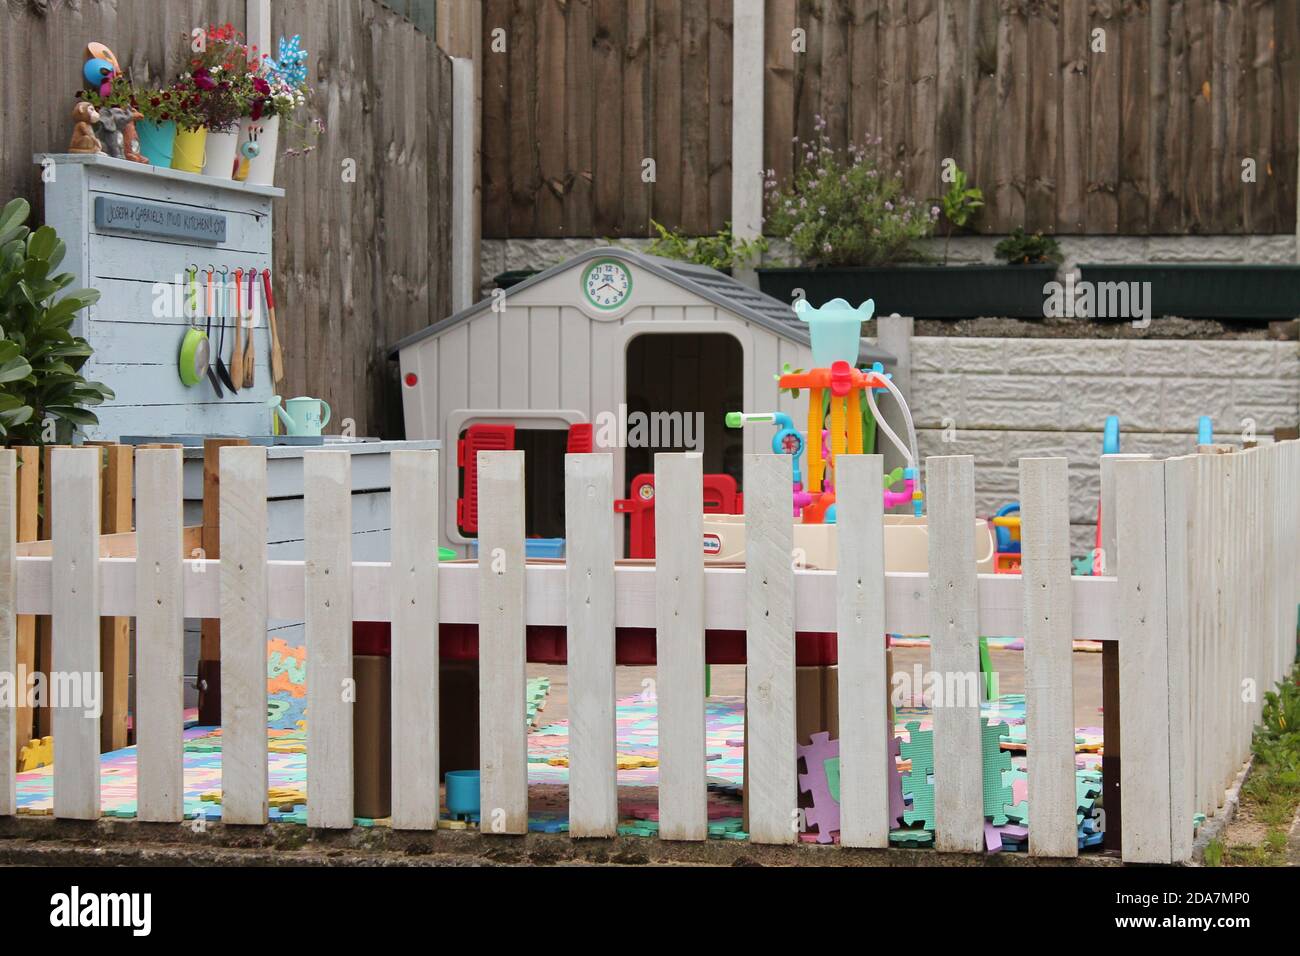 Kids play area fenced off in a garden to allow children to play safely during UK lockdown Stock Photo